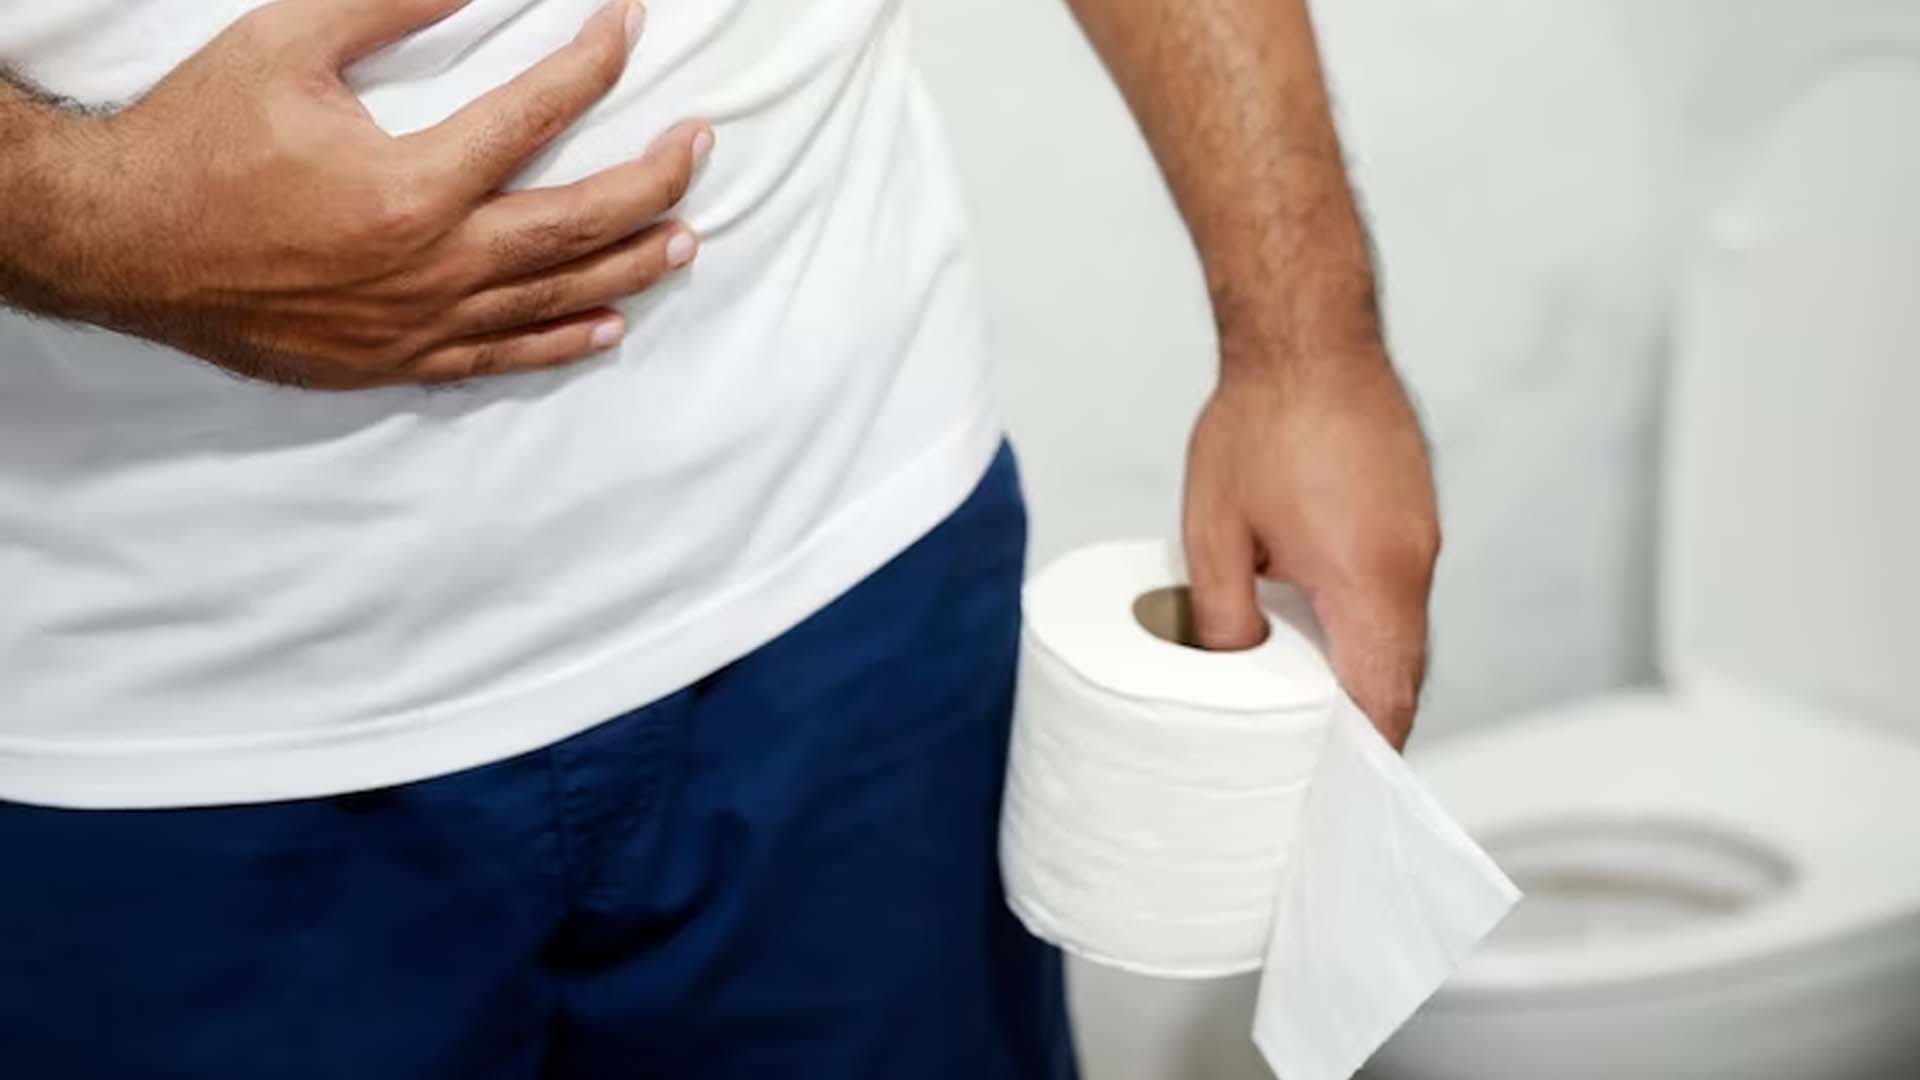 Man suffering from Diarrhea holding tissue in hands